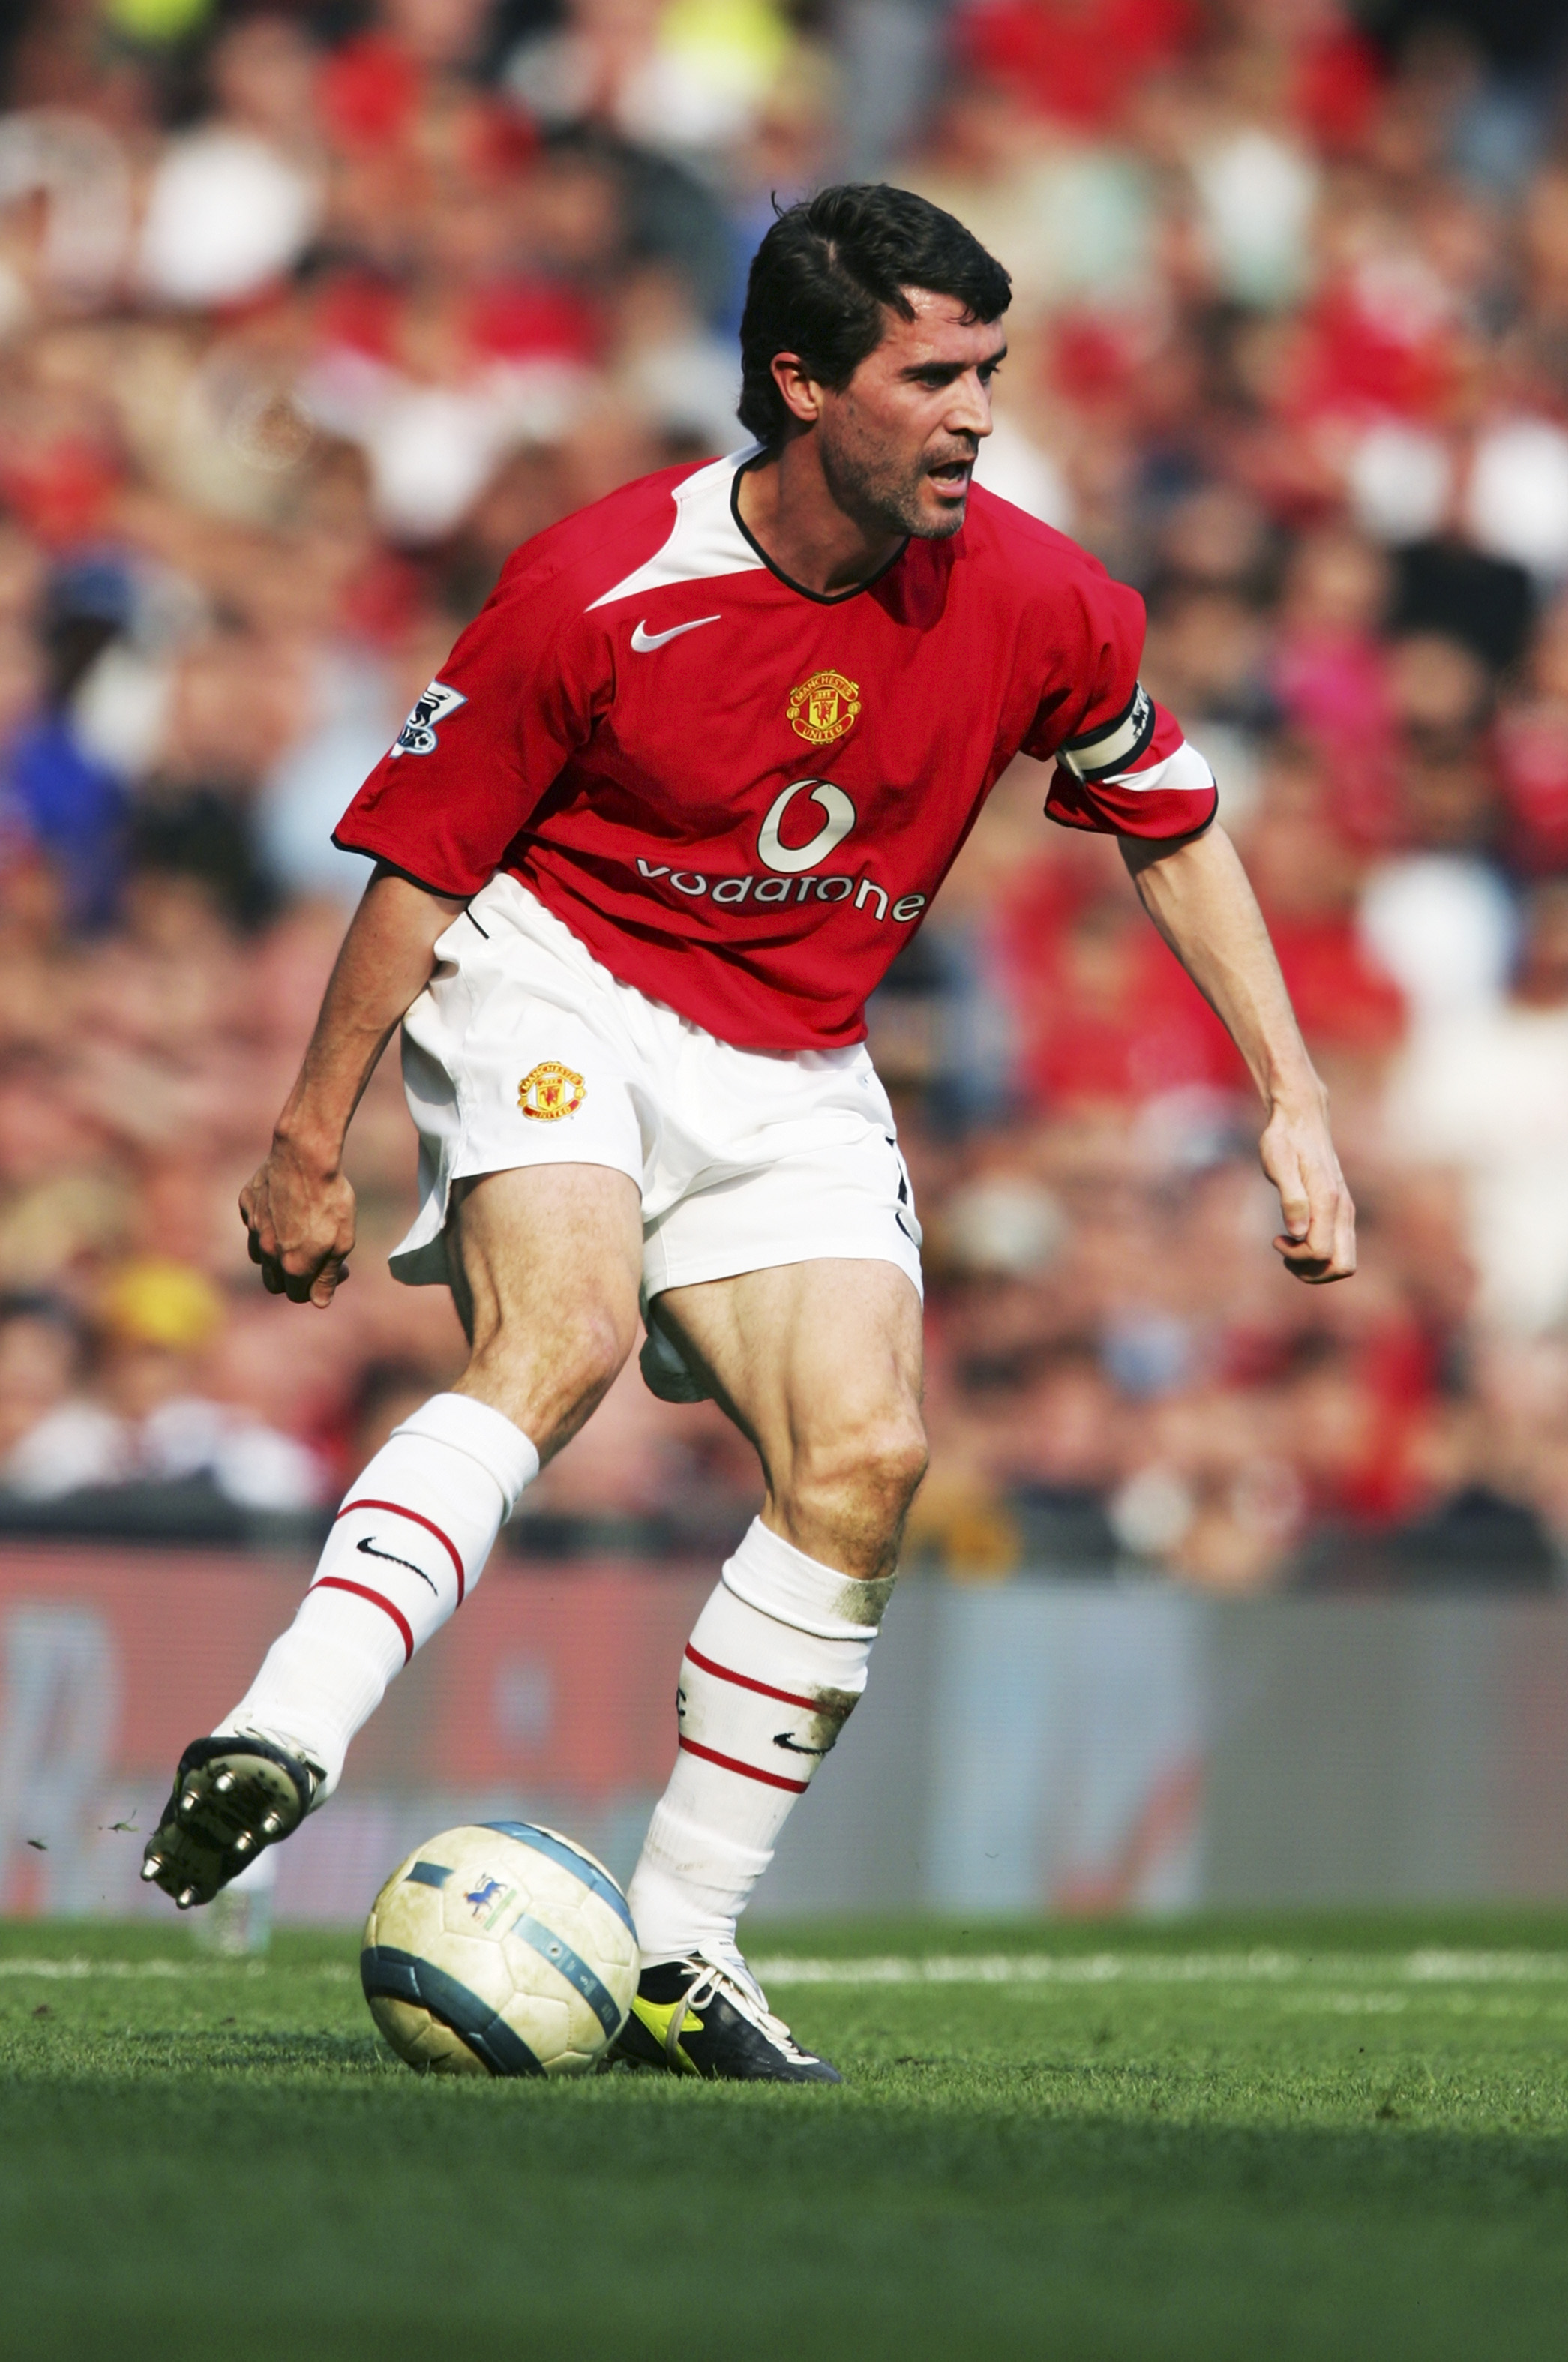 MANCHESTER, ENGLAND - APRIL 2:  Roy Keane of Manchester United in action during the Premier League match between Manchester United and Blackburn Rovers at Old Trafford on April 2, 2005 in Manchester, England.  (Photo by Alex Livesey/Getty Images)